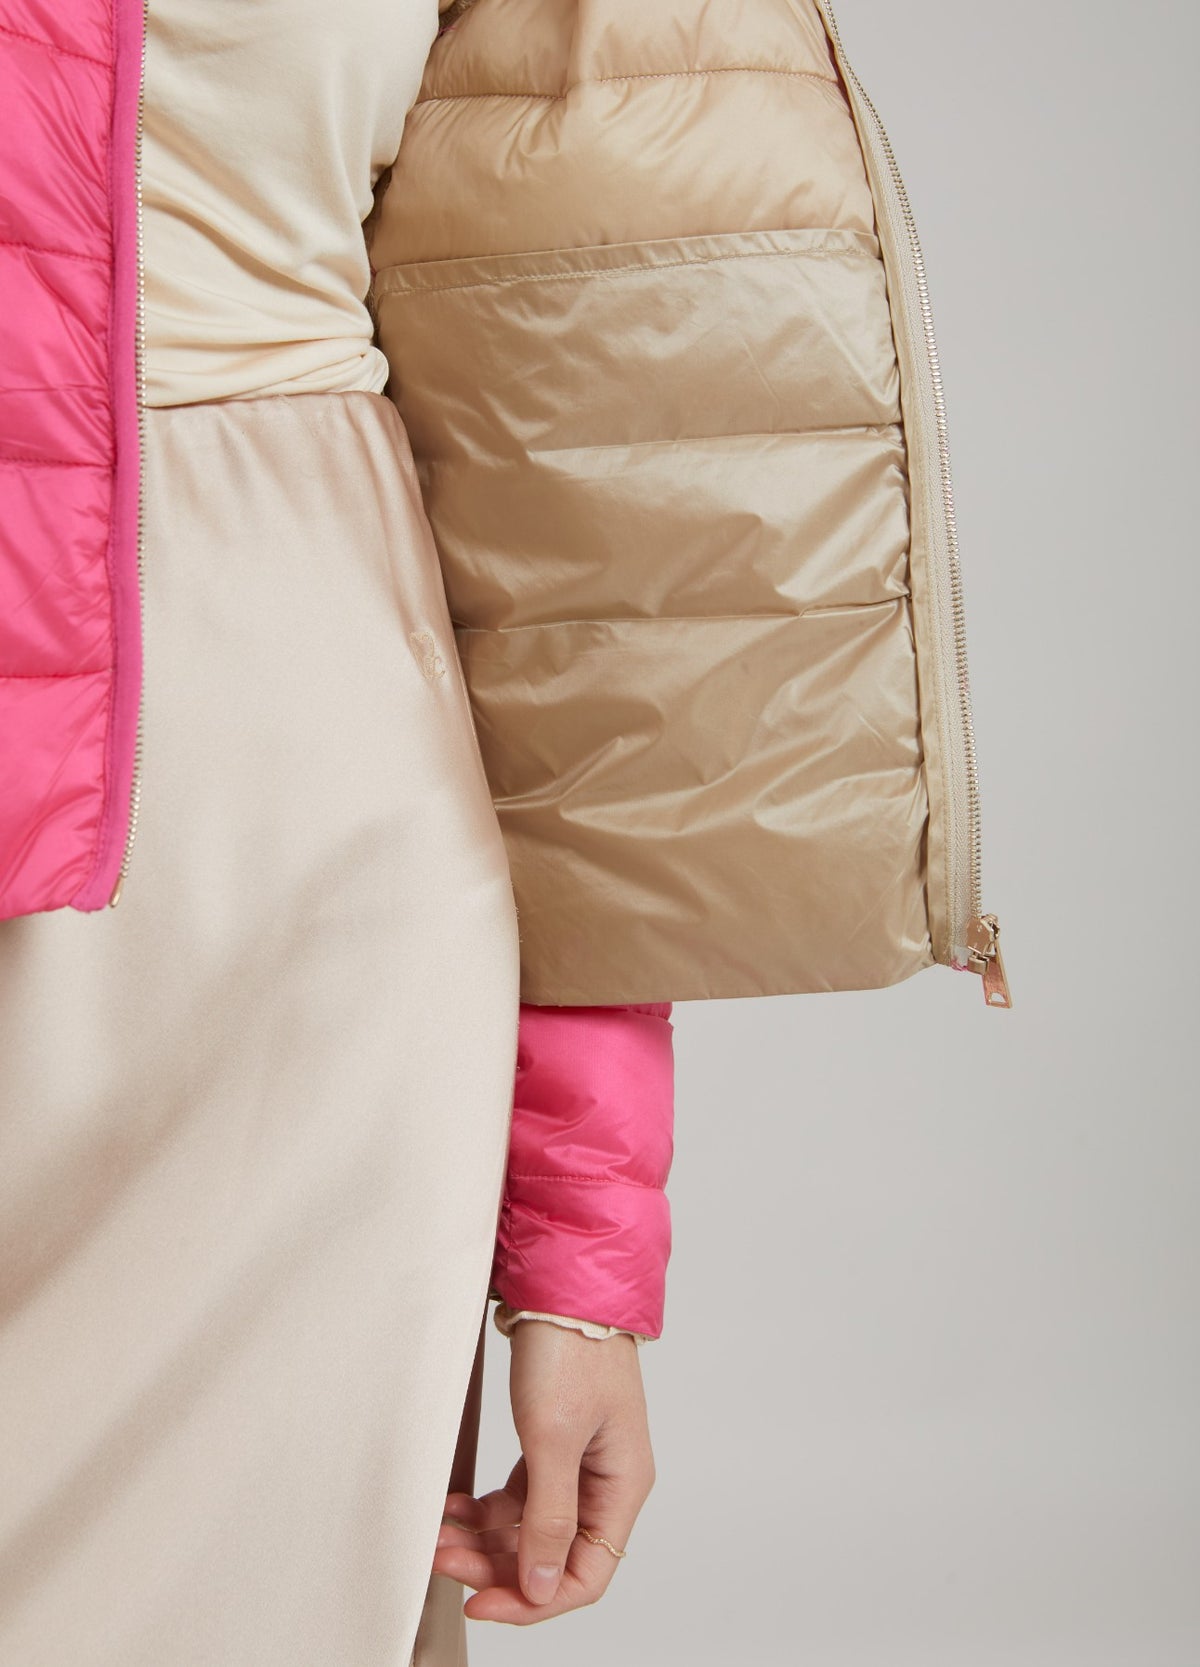 CC Emma Quilted Jacket - Two choices of colours, Pink and Sand